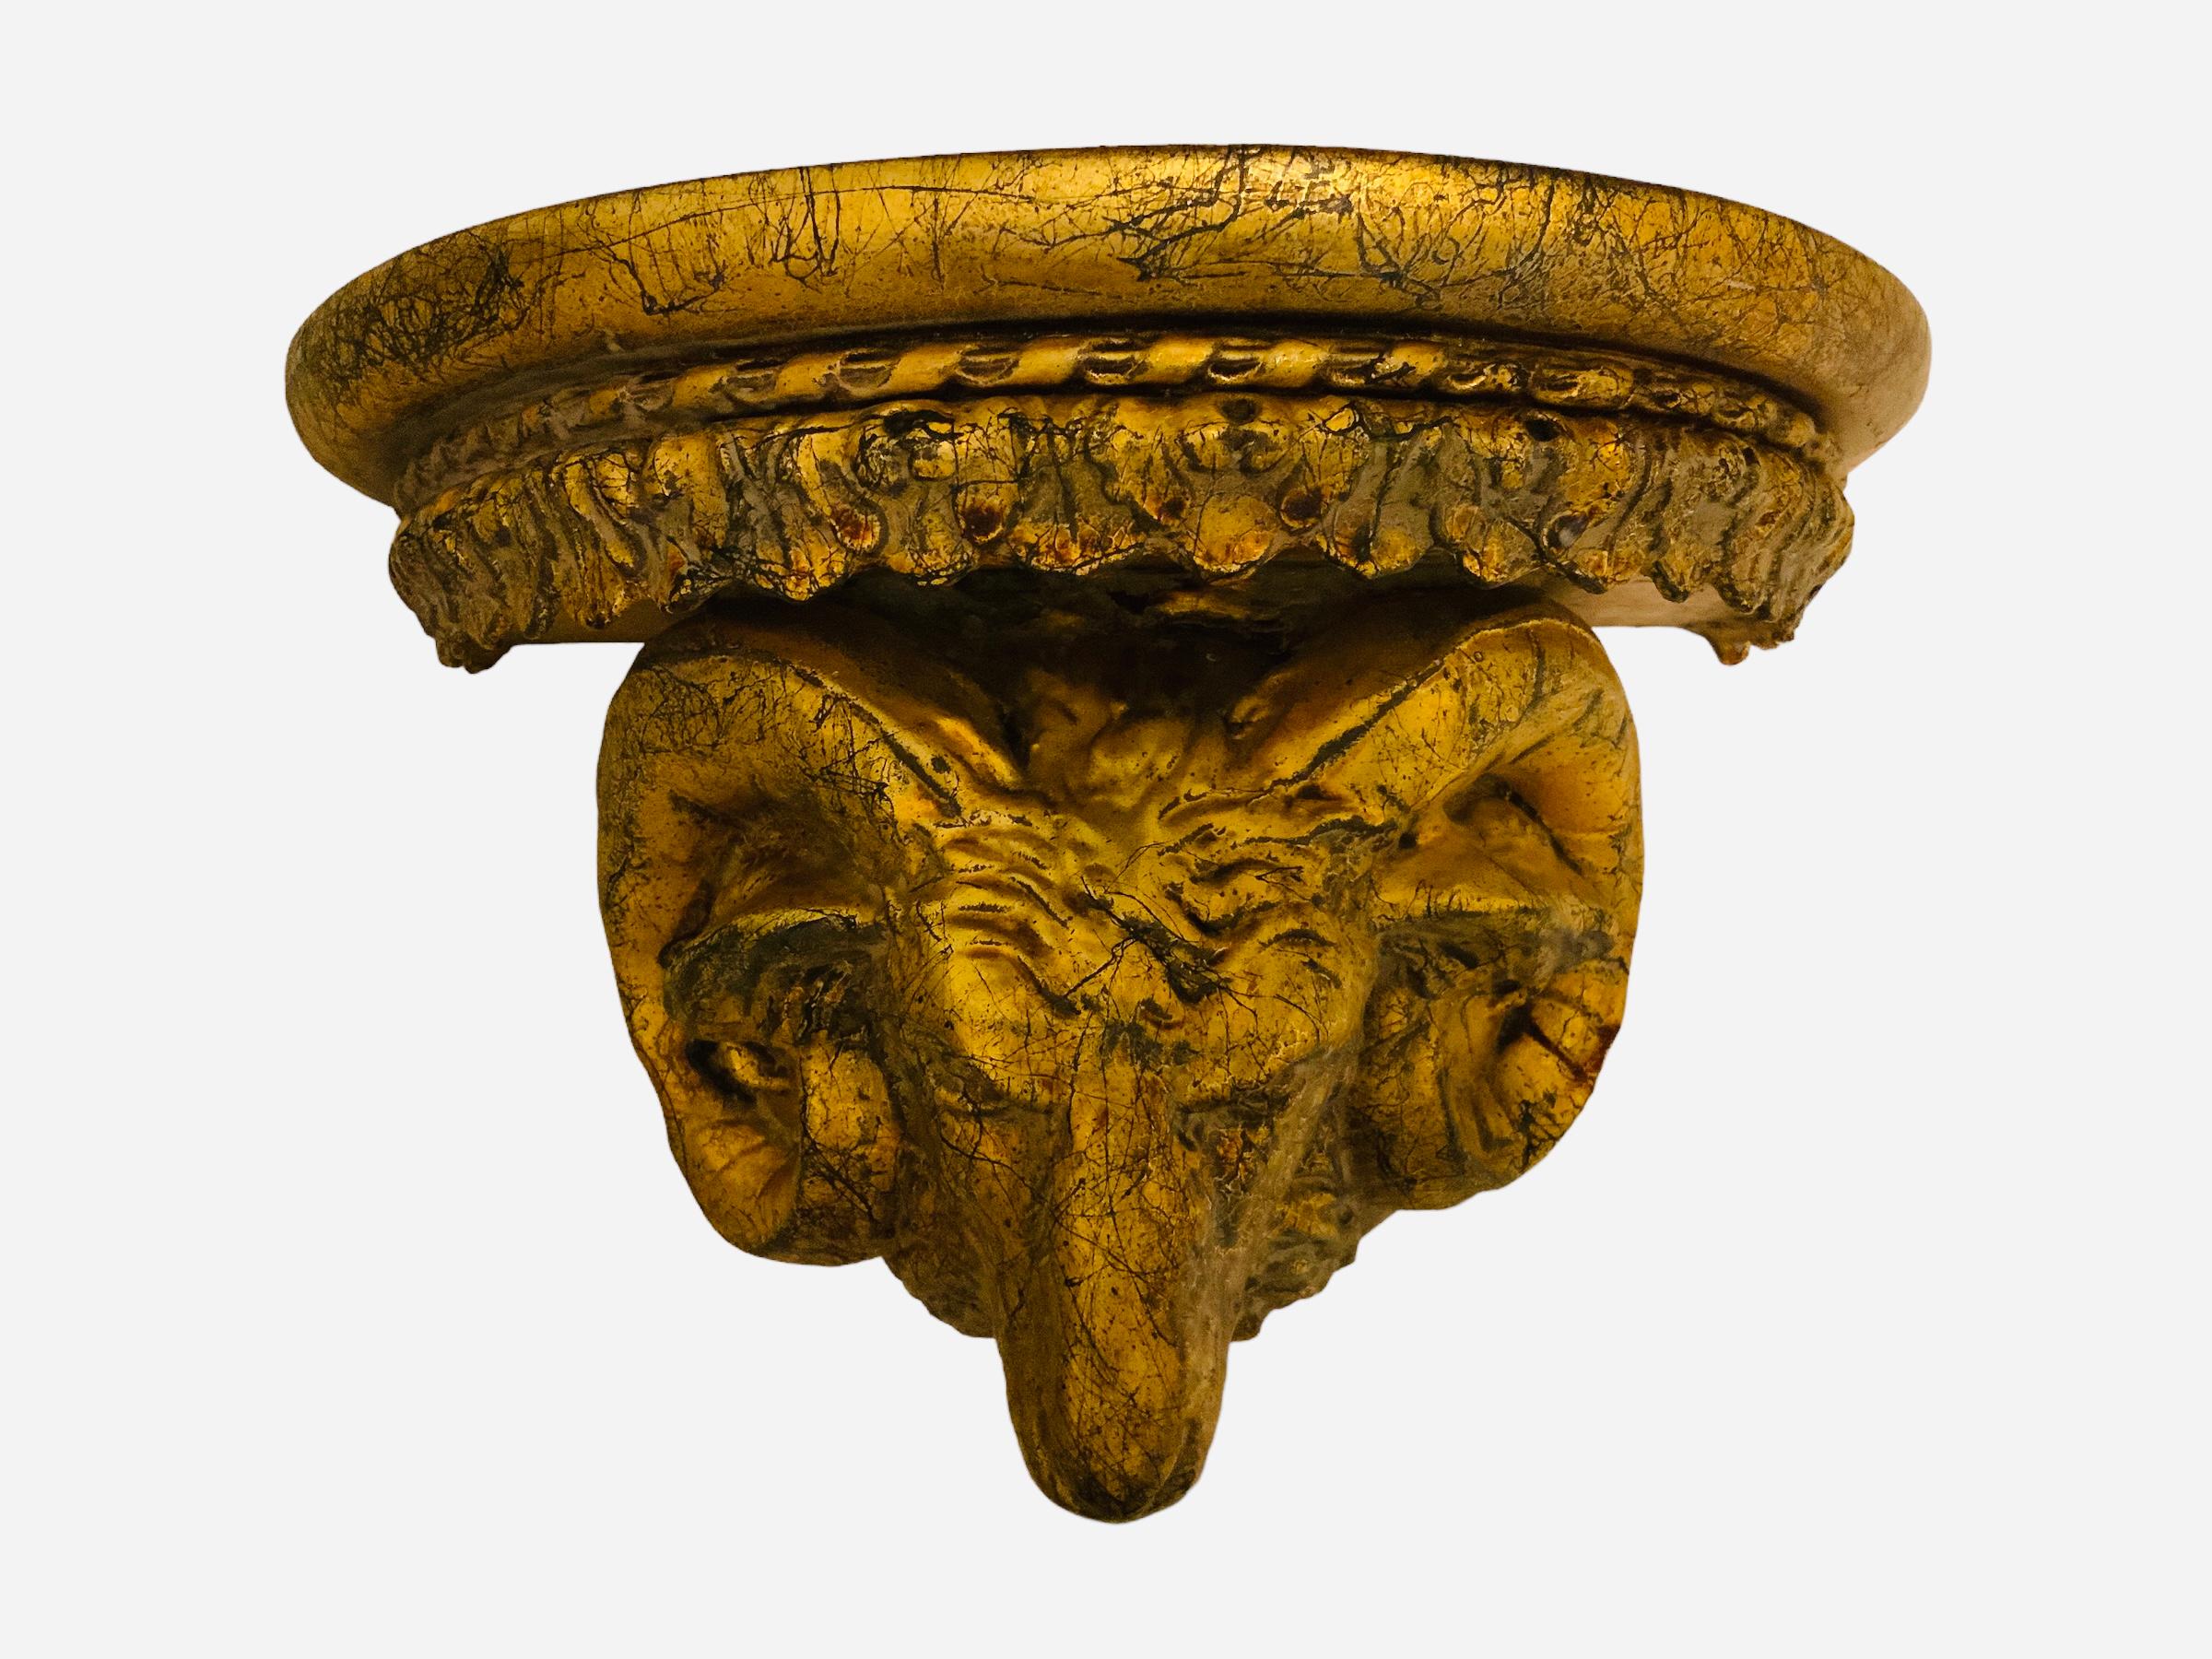 This is a pair of gilt wood ram’s head wall brackets/shelves. They depict a half moon shaped top shelves. They are decorated with a carved garland of acanthus leaves below the top. Their bodies are shaped as large ram’s heads with scrolled horns.